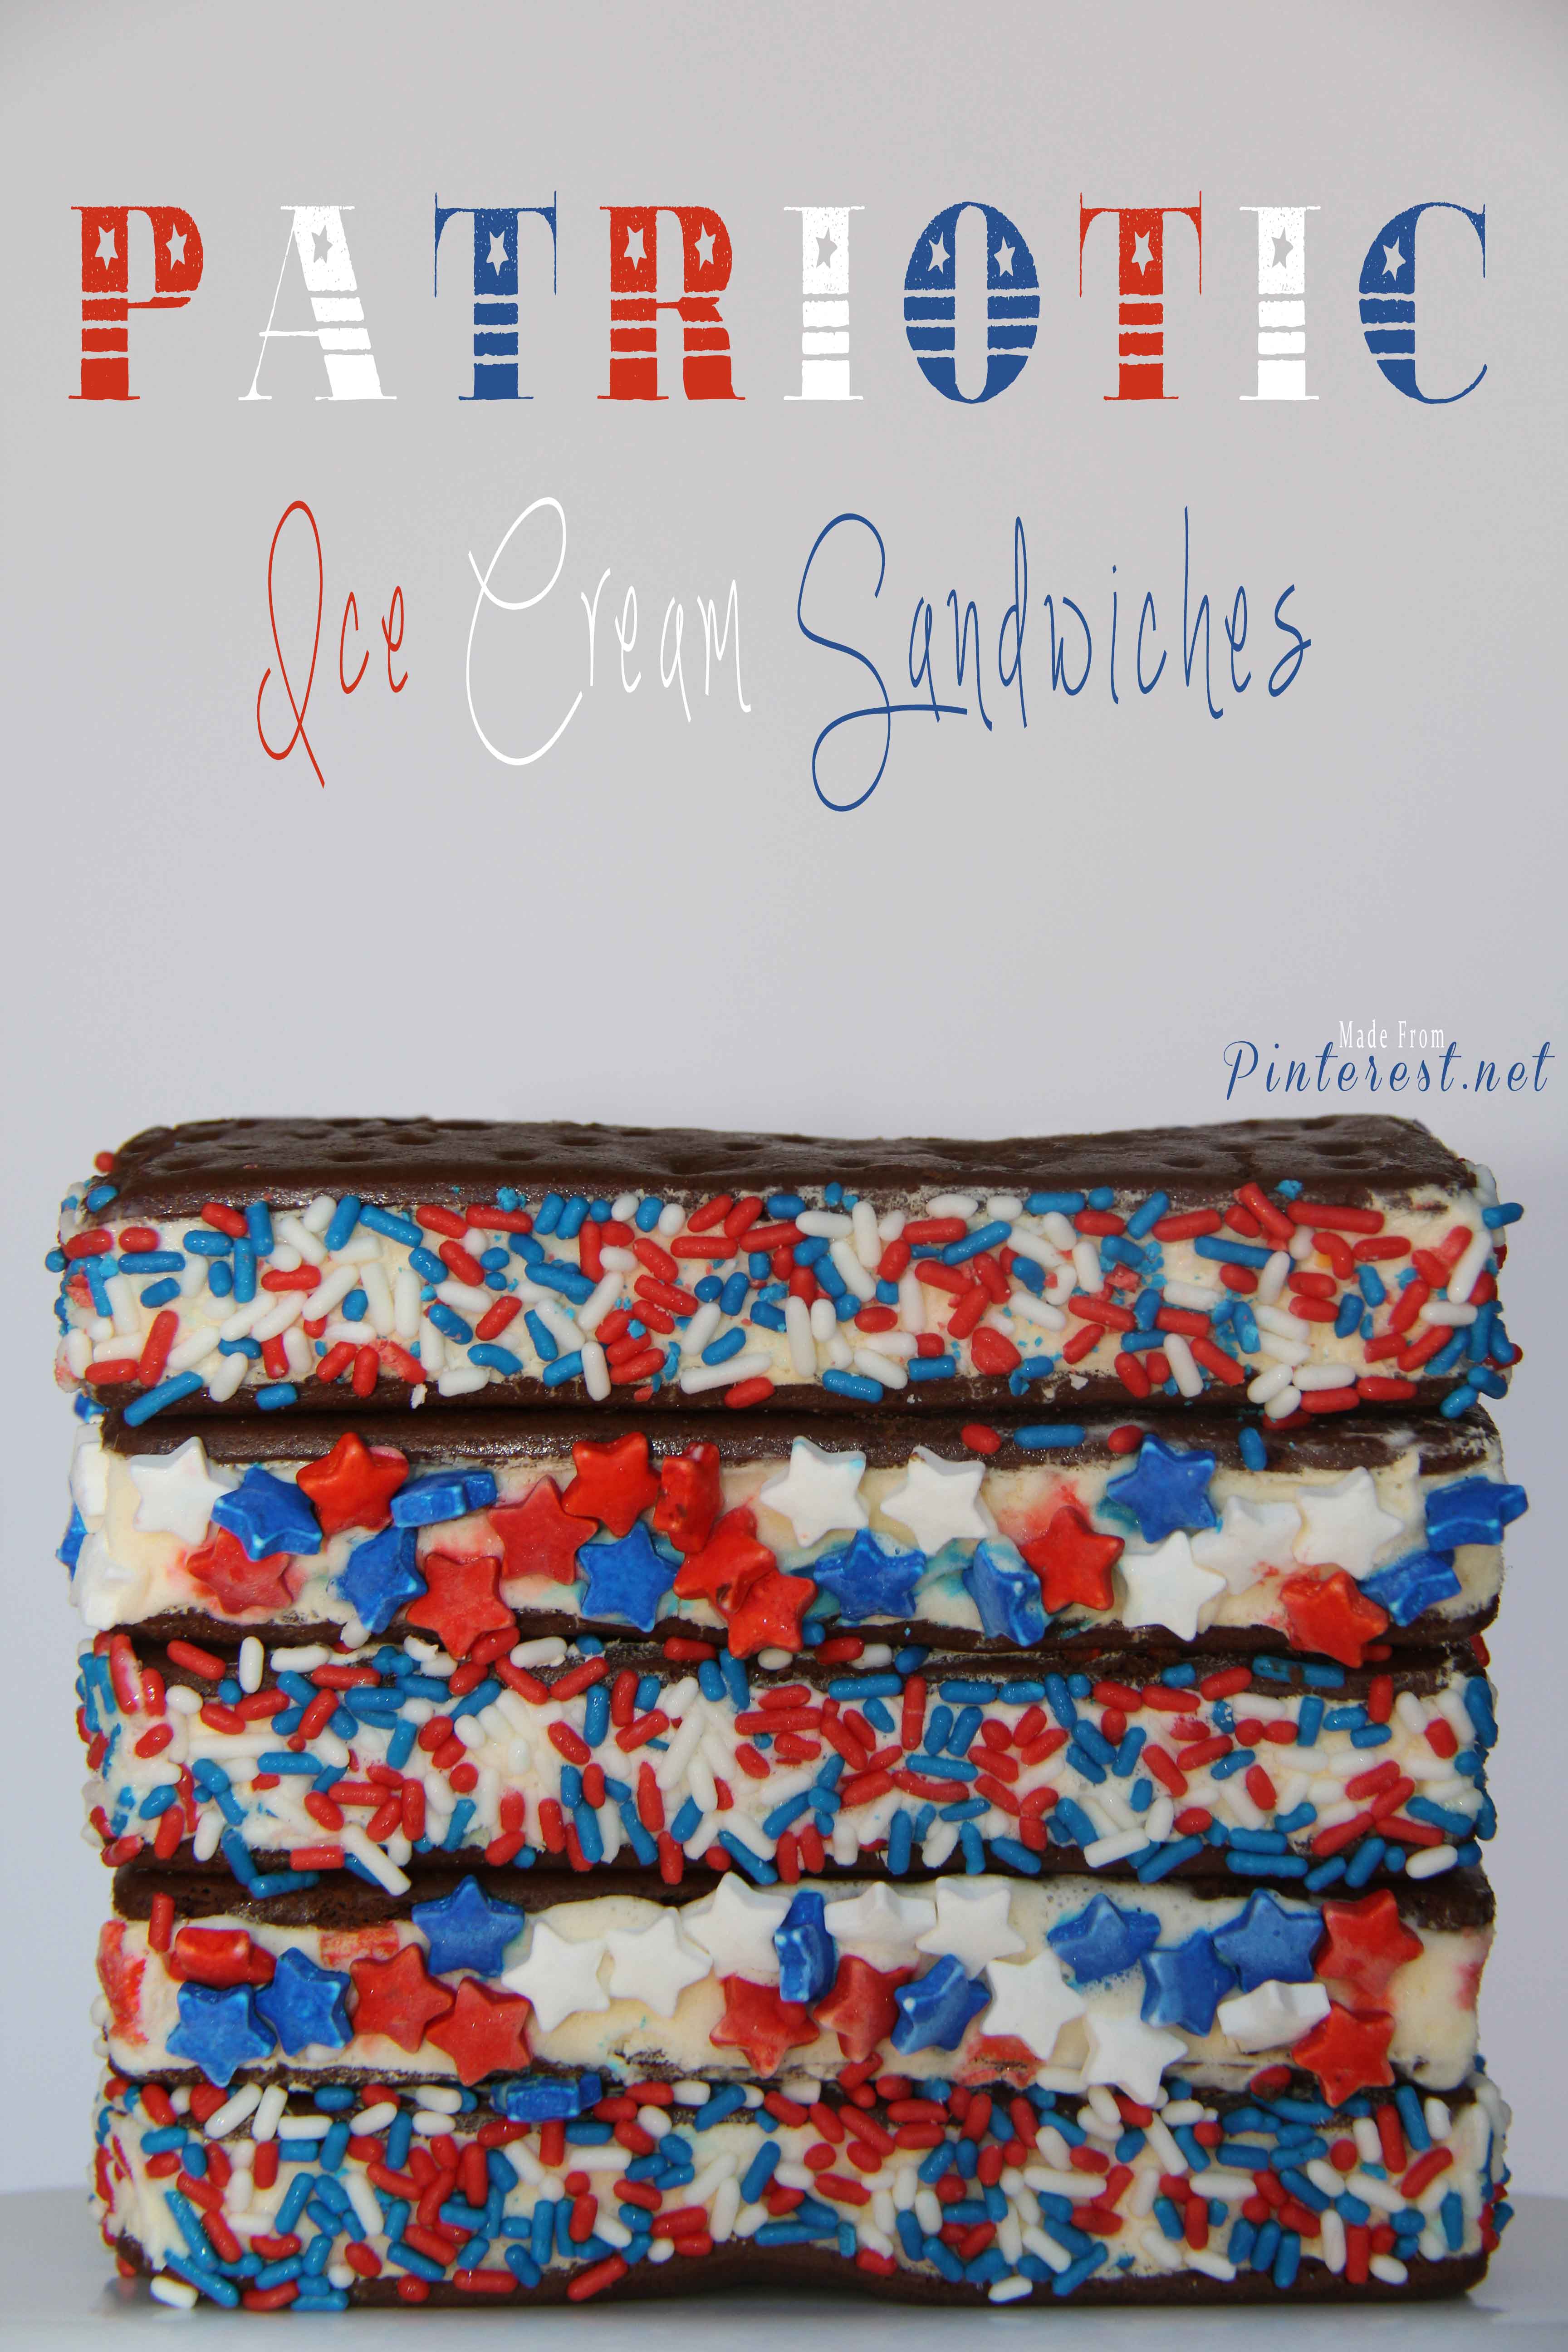 #Ice Cream Sandwiches #Patriotic - Jazz up plain ice cream sandwiches with red, white and blue sprinkles. #4th of July This pin was tested and reviewed by one of the 3 crazy sisters at https://madefrompinterest.net/